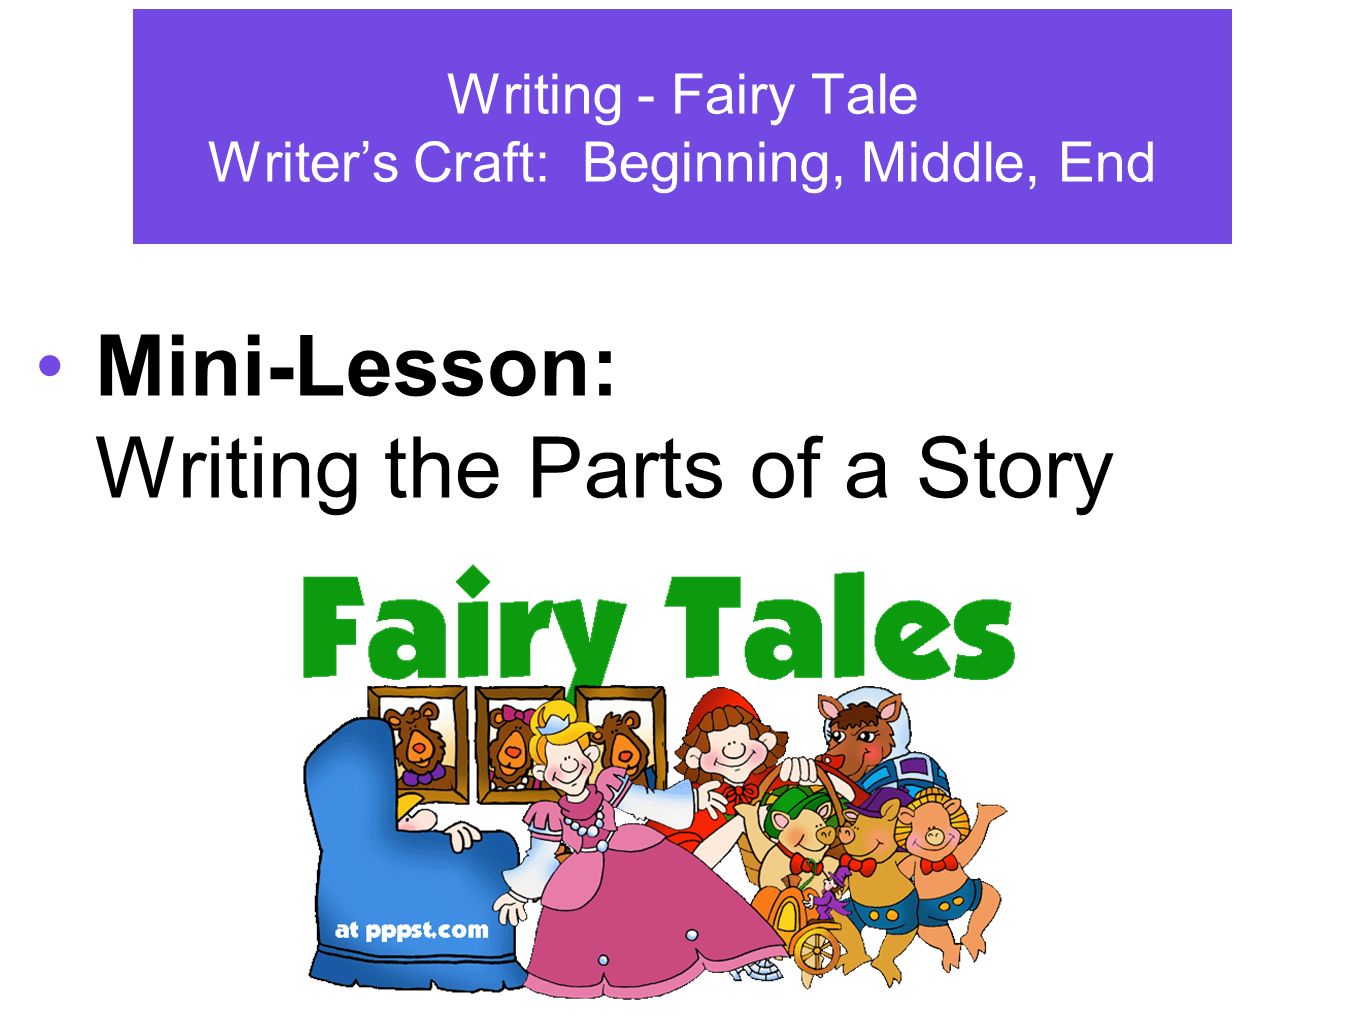 Writing about fairy tales